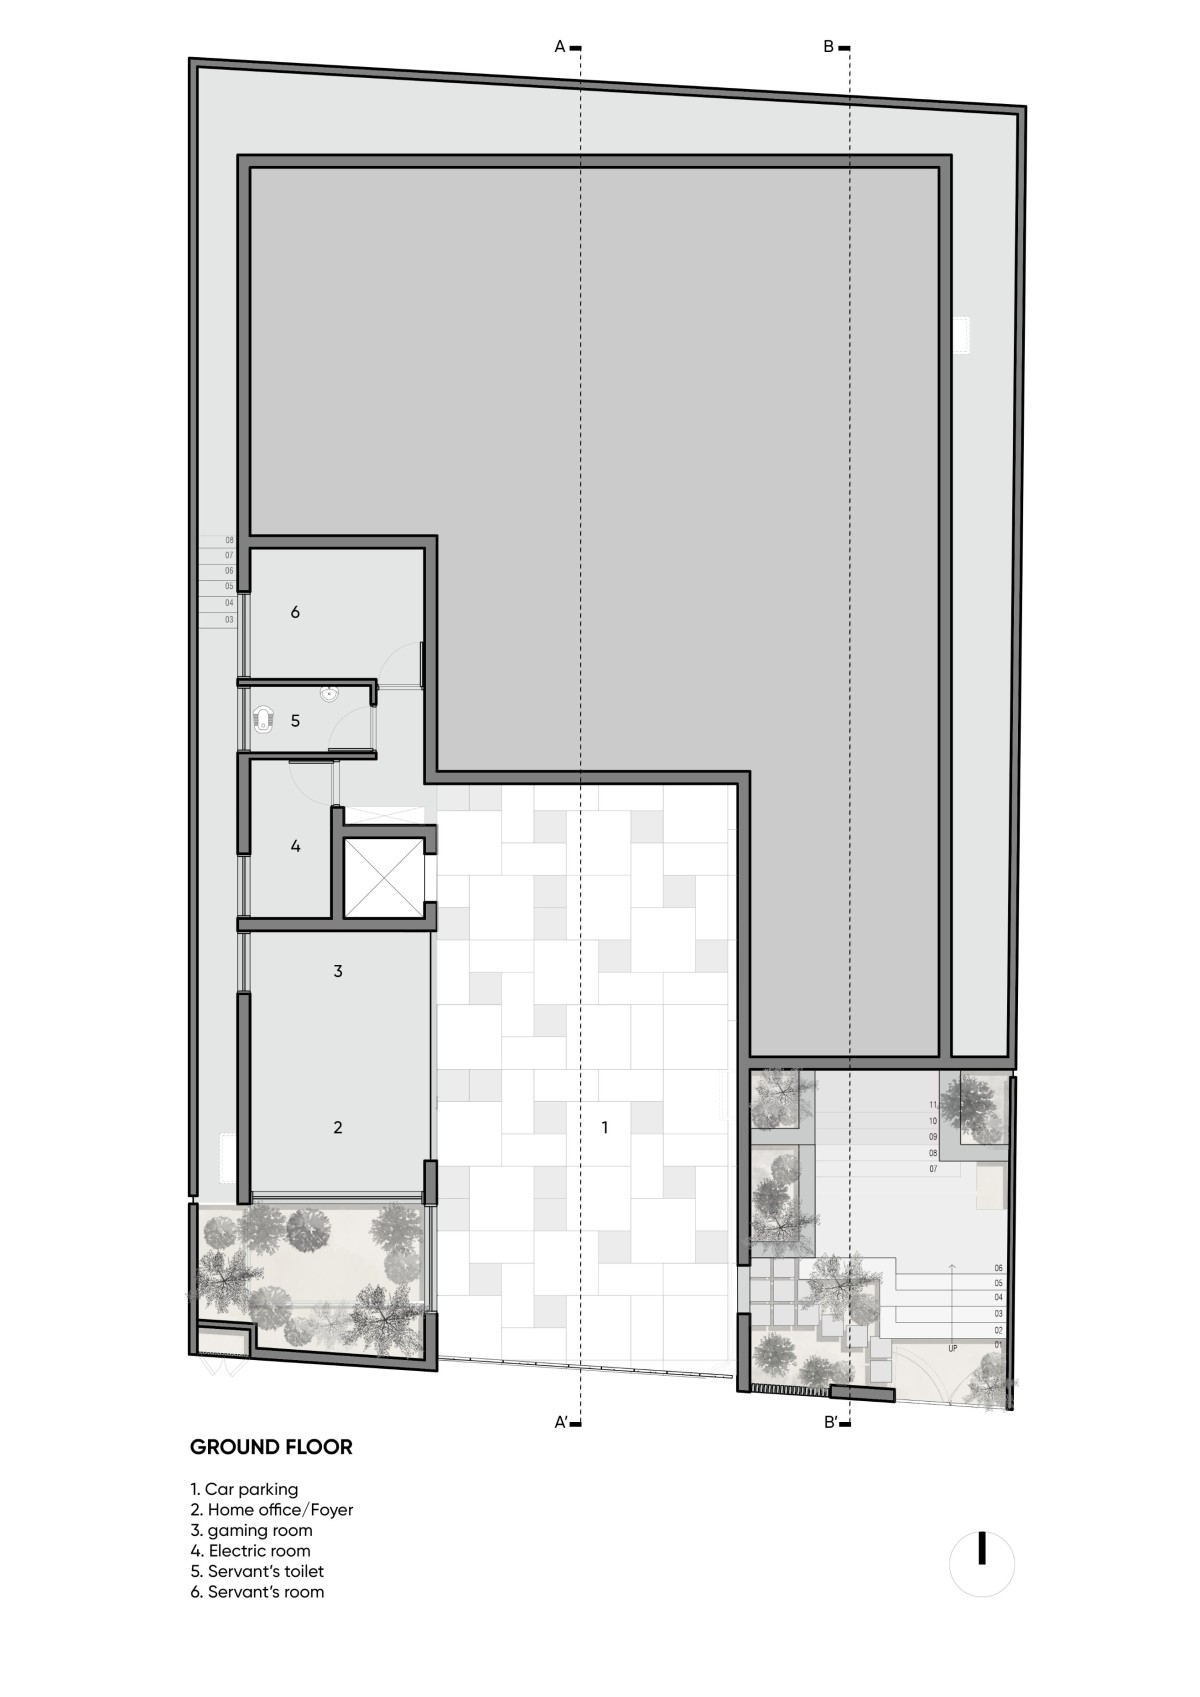 Ground floor plan of Janani House by Collage Architecture Studio